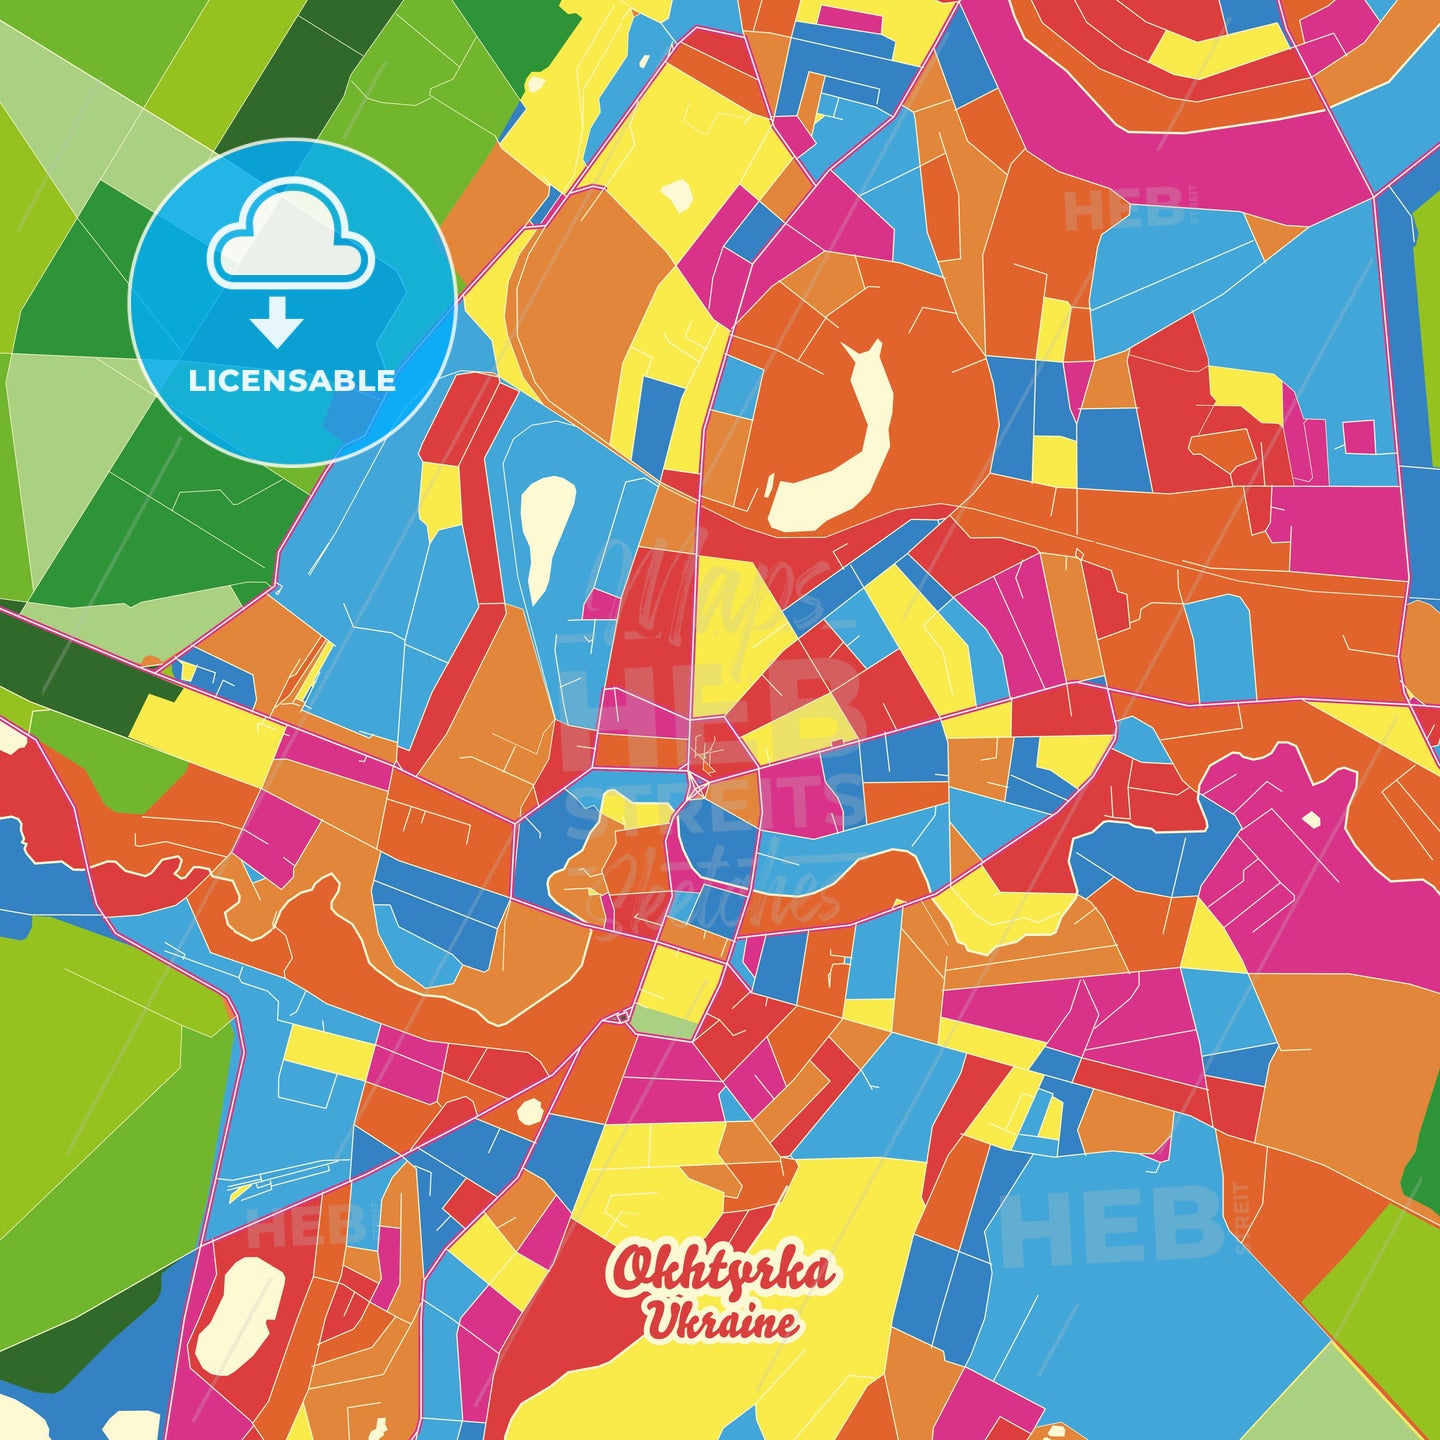 Okhtyrka, Ukraine Crazy Colorful Street Map Poster Template - HEBSTREITS Sketches